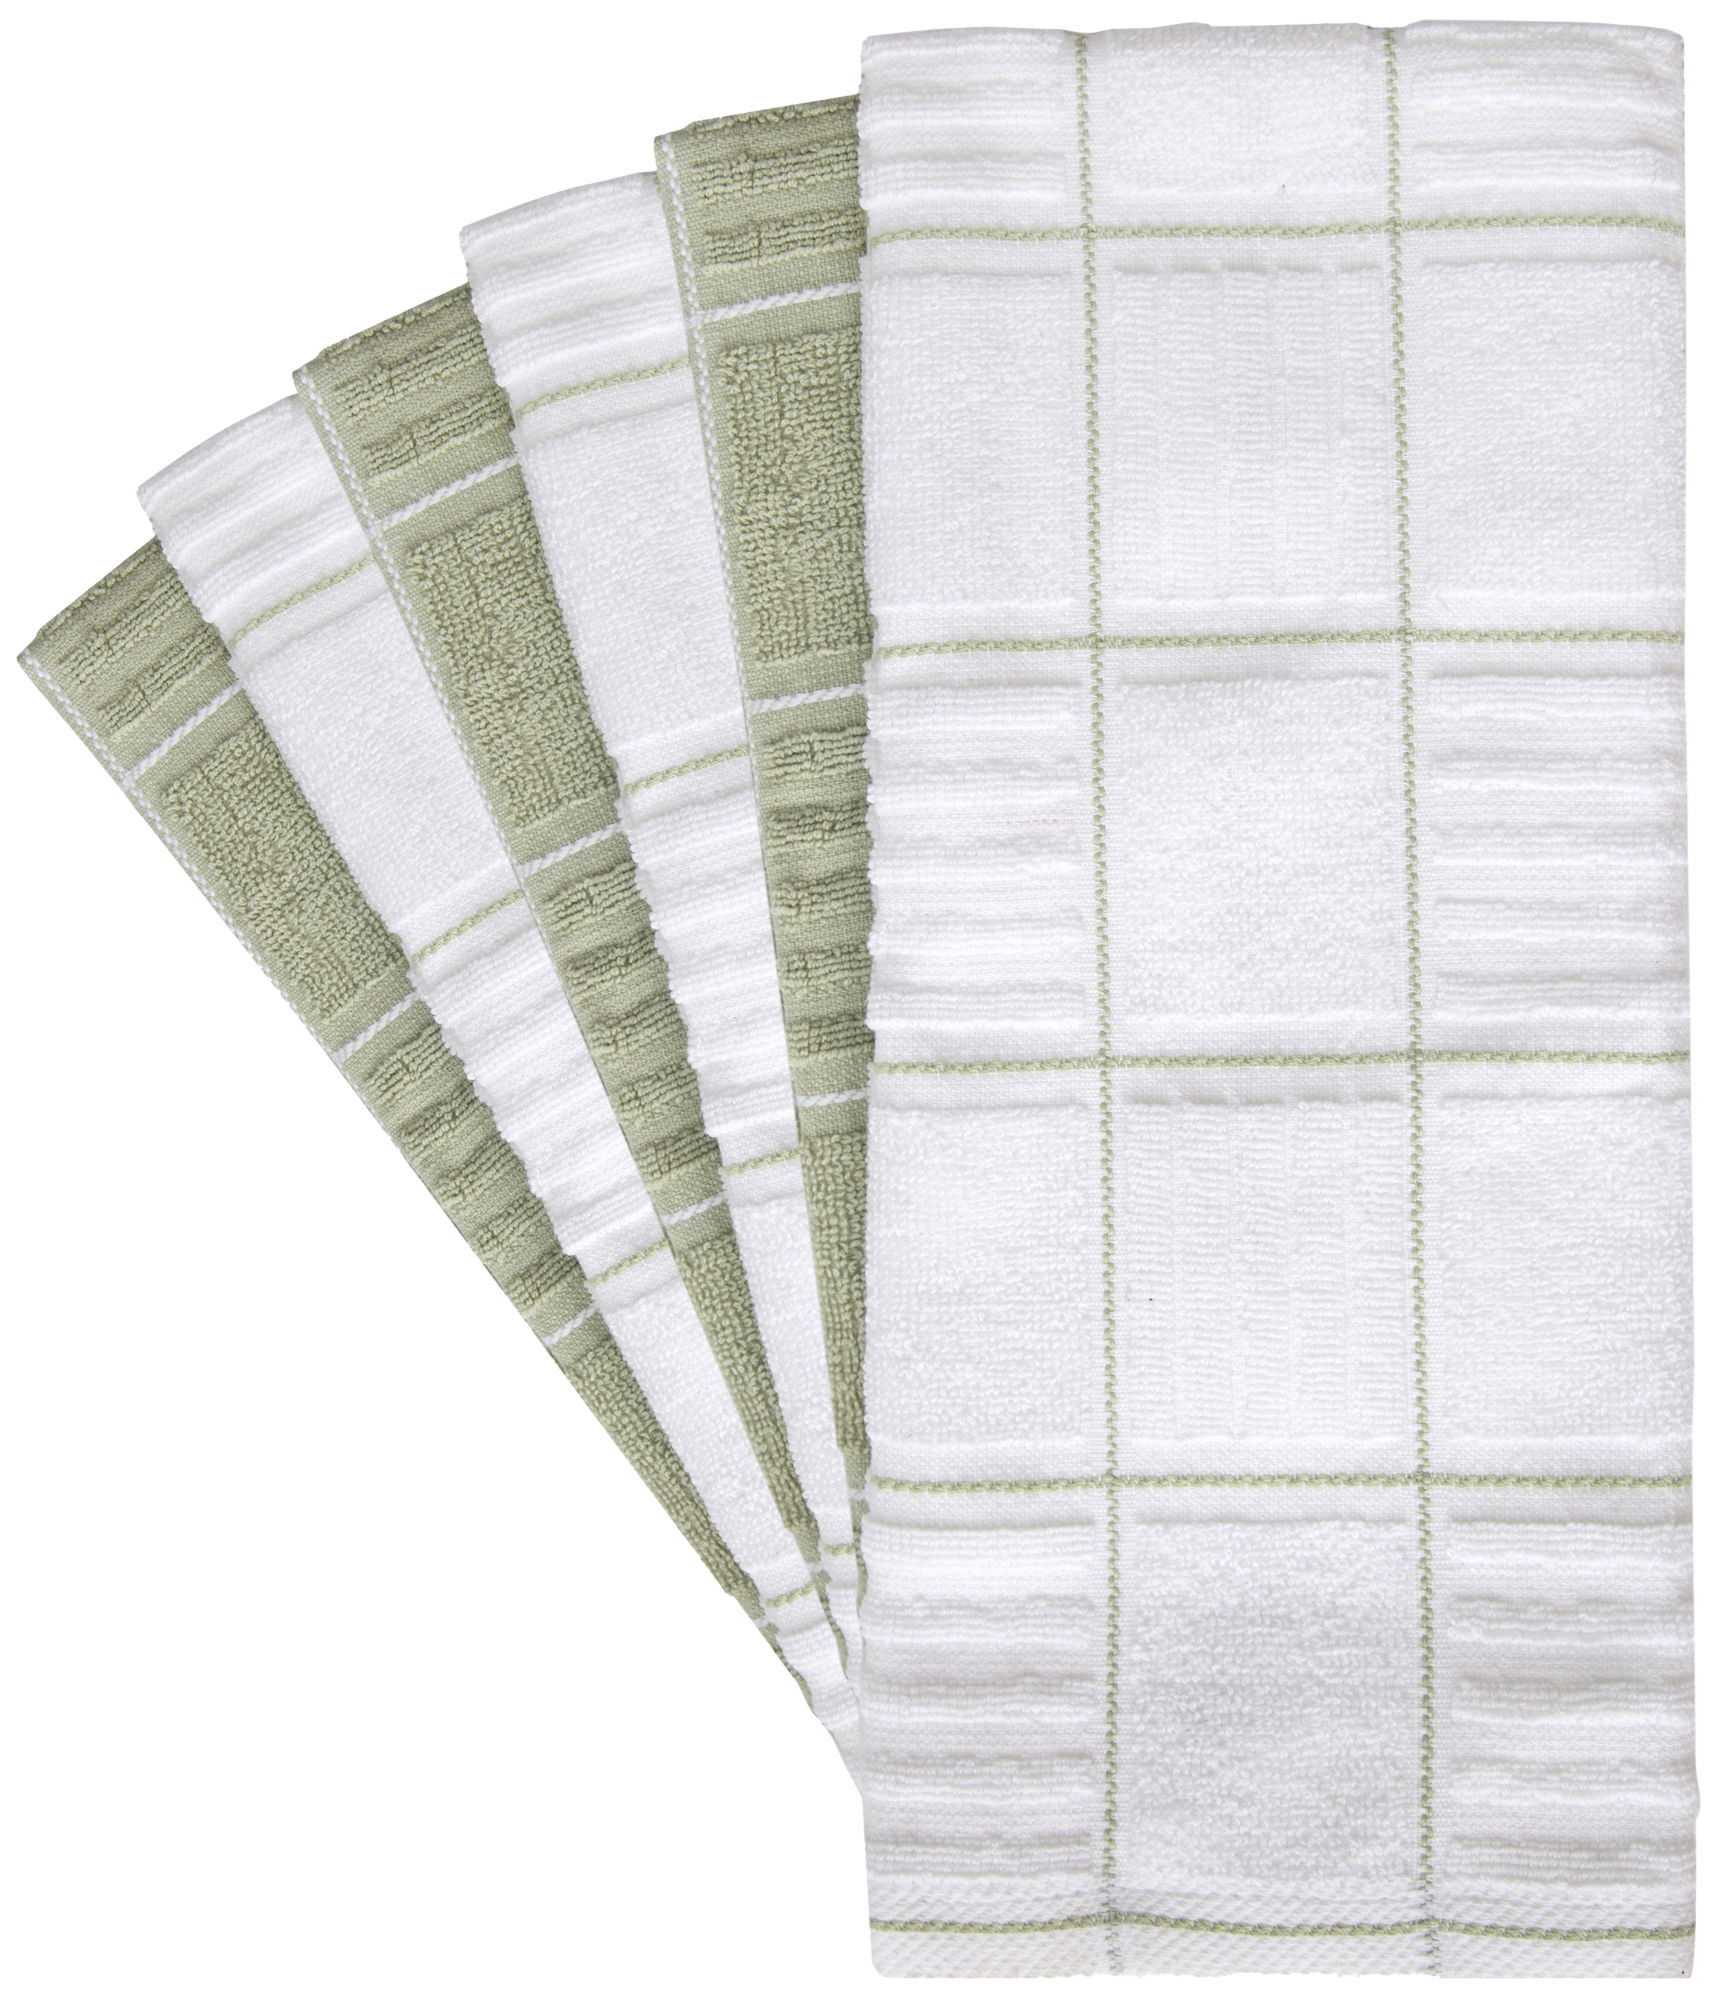 The Big One® Daisy 6-pk. Kitchen Towels